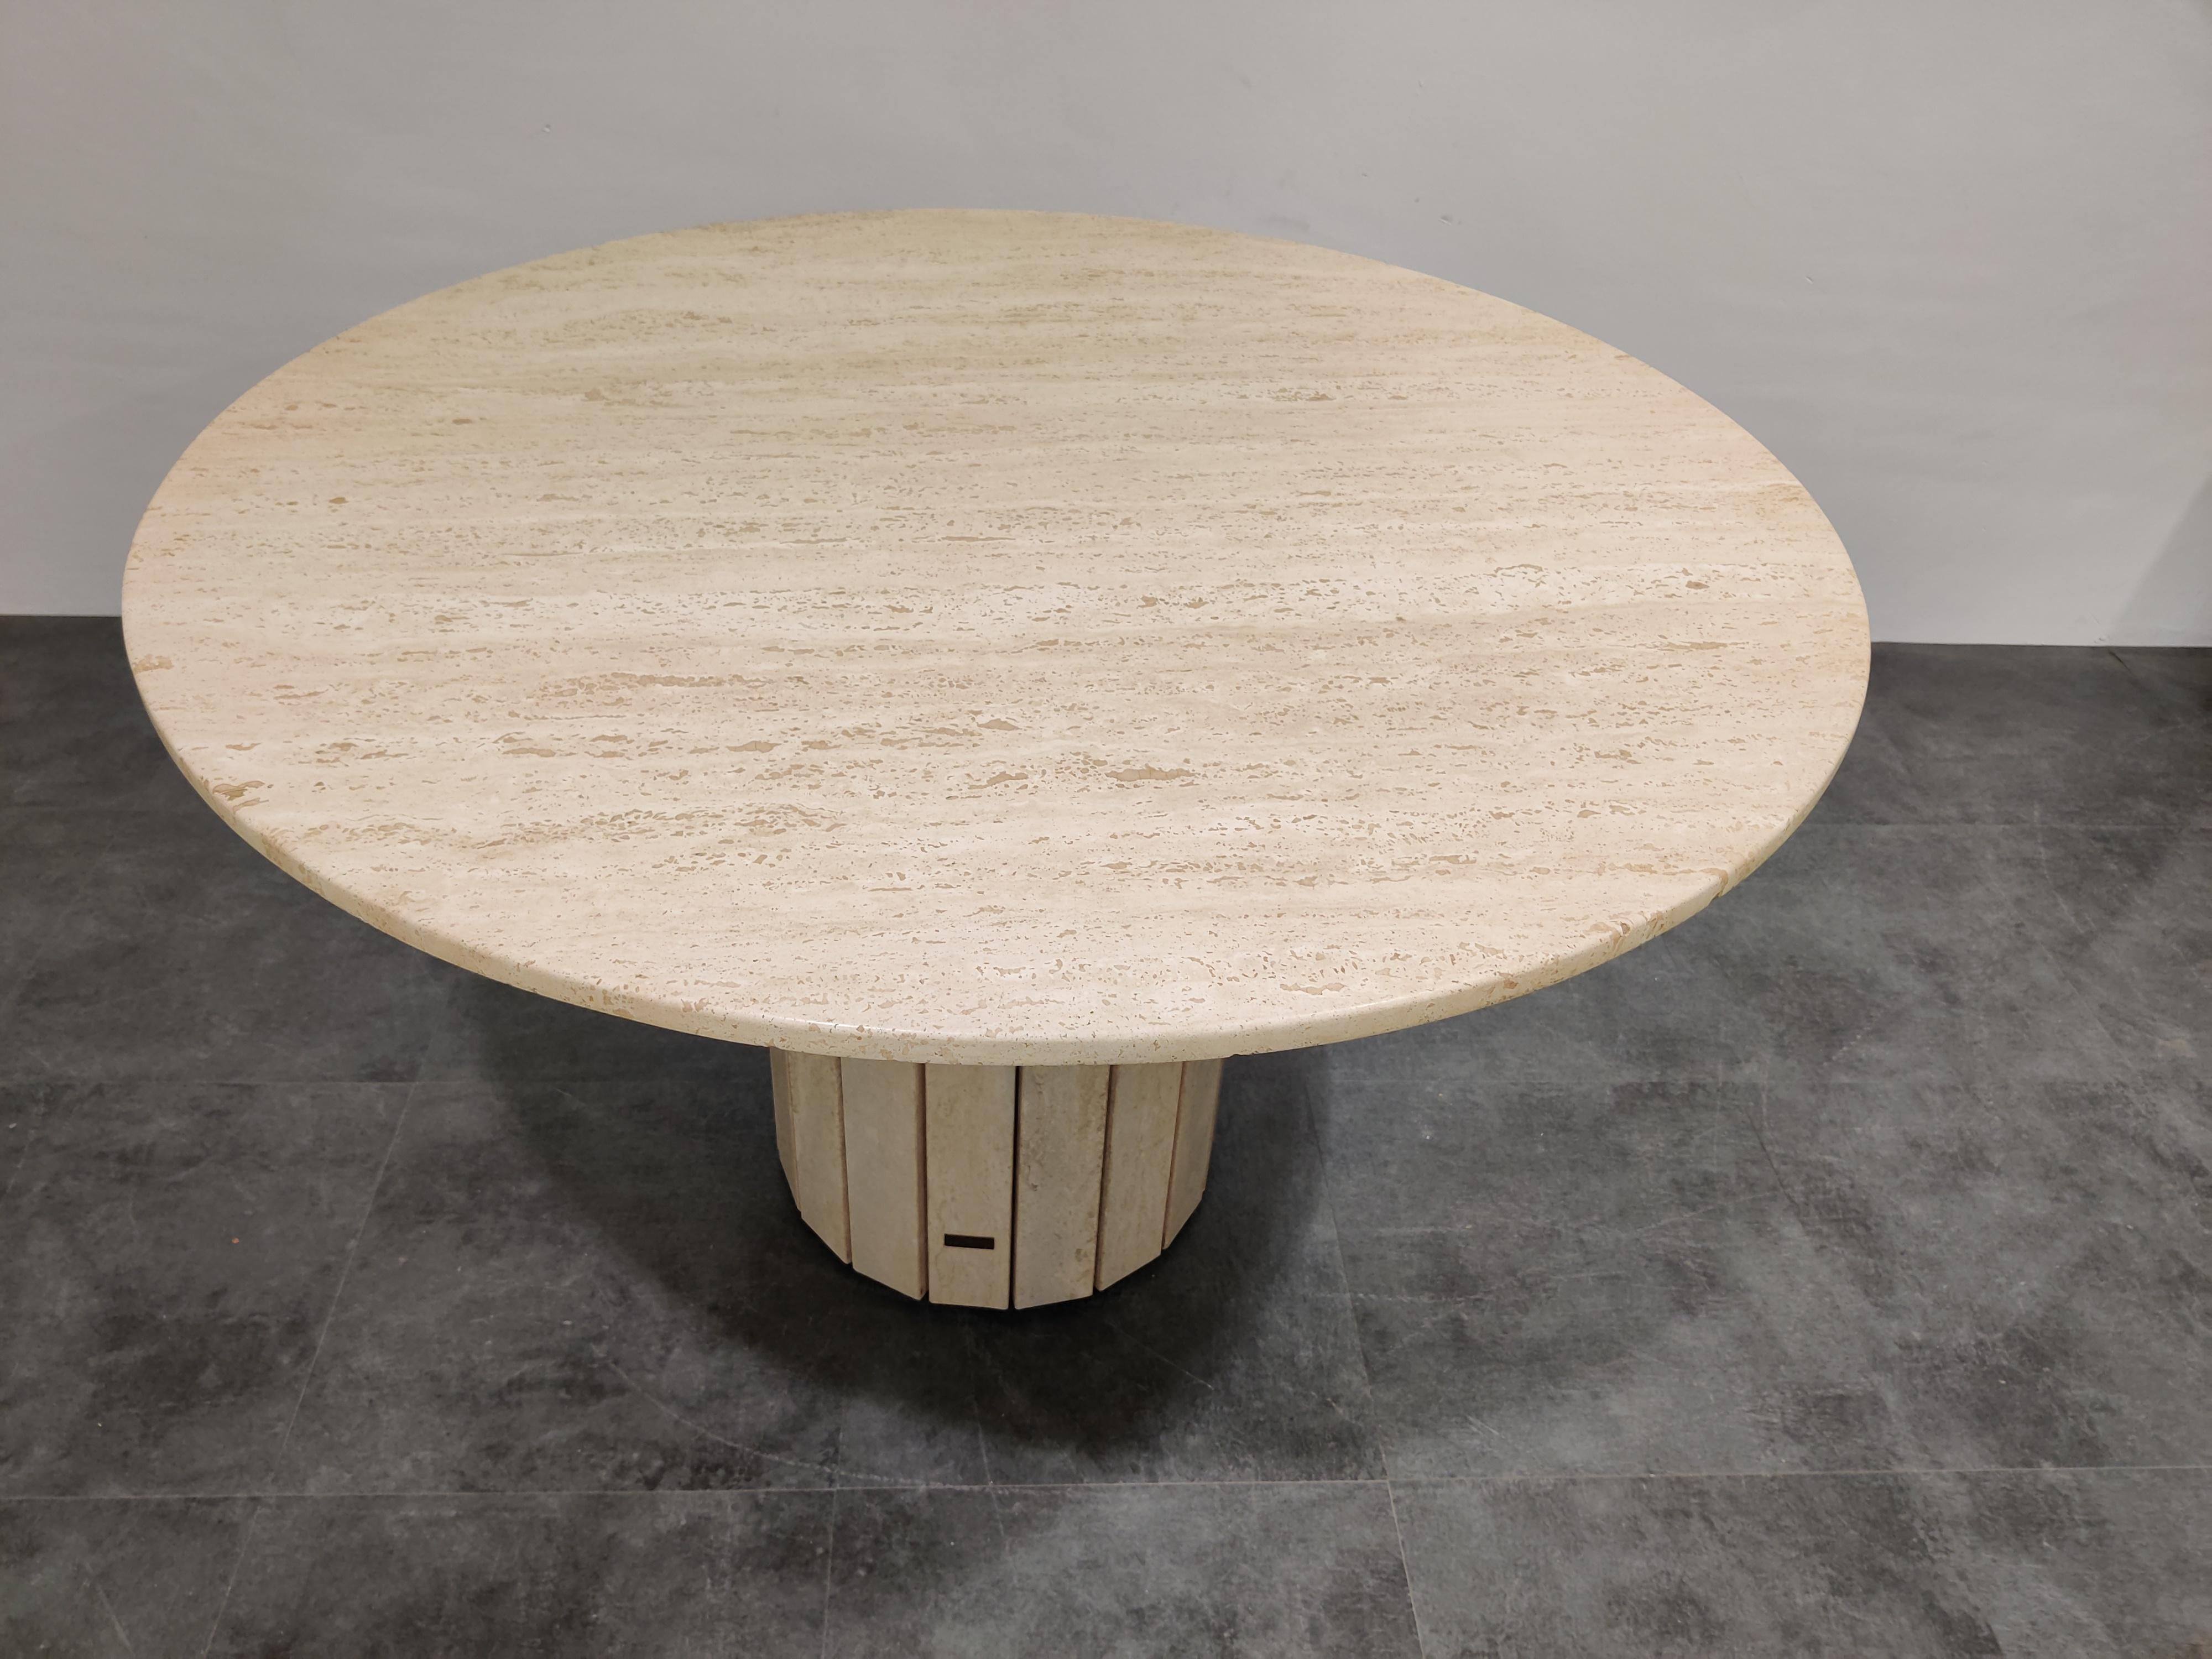 Beautiful dining or center table made from travertine stone by Jean Charles.

The table has a beautiful base with brass and travertine stone slats.

Good condition

1970s - Italy

Measures: Height 72cm/28.34